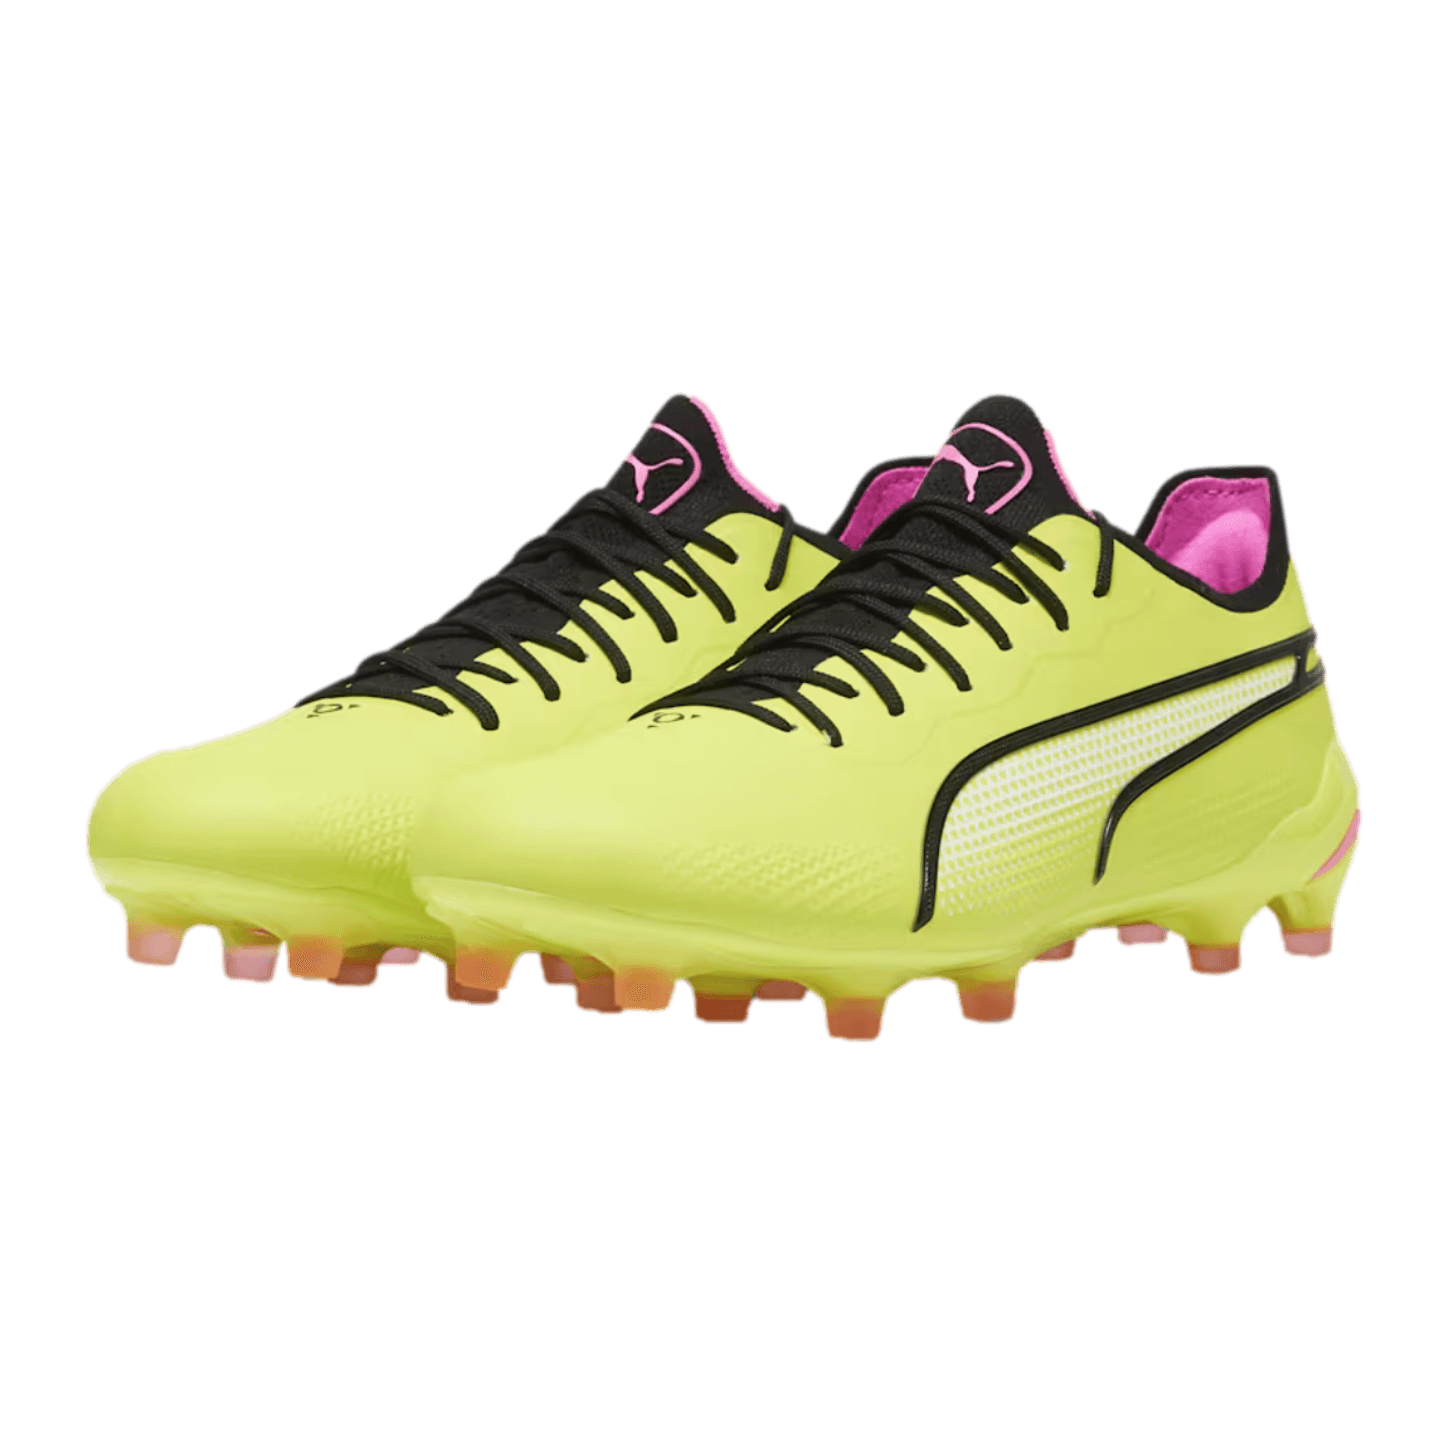 Puma King Ultimate Firm Ground Cleats